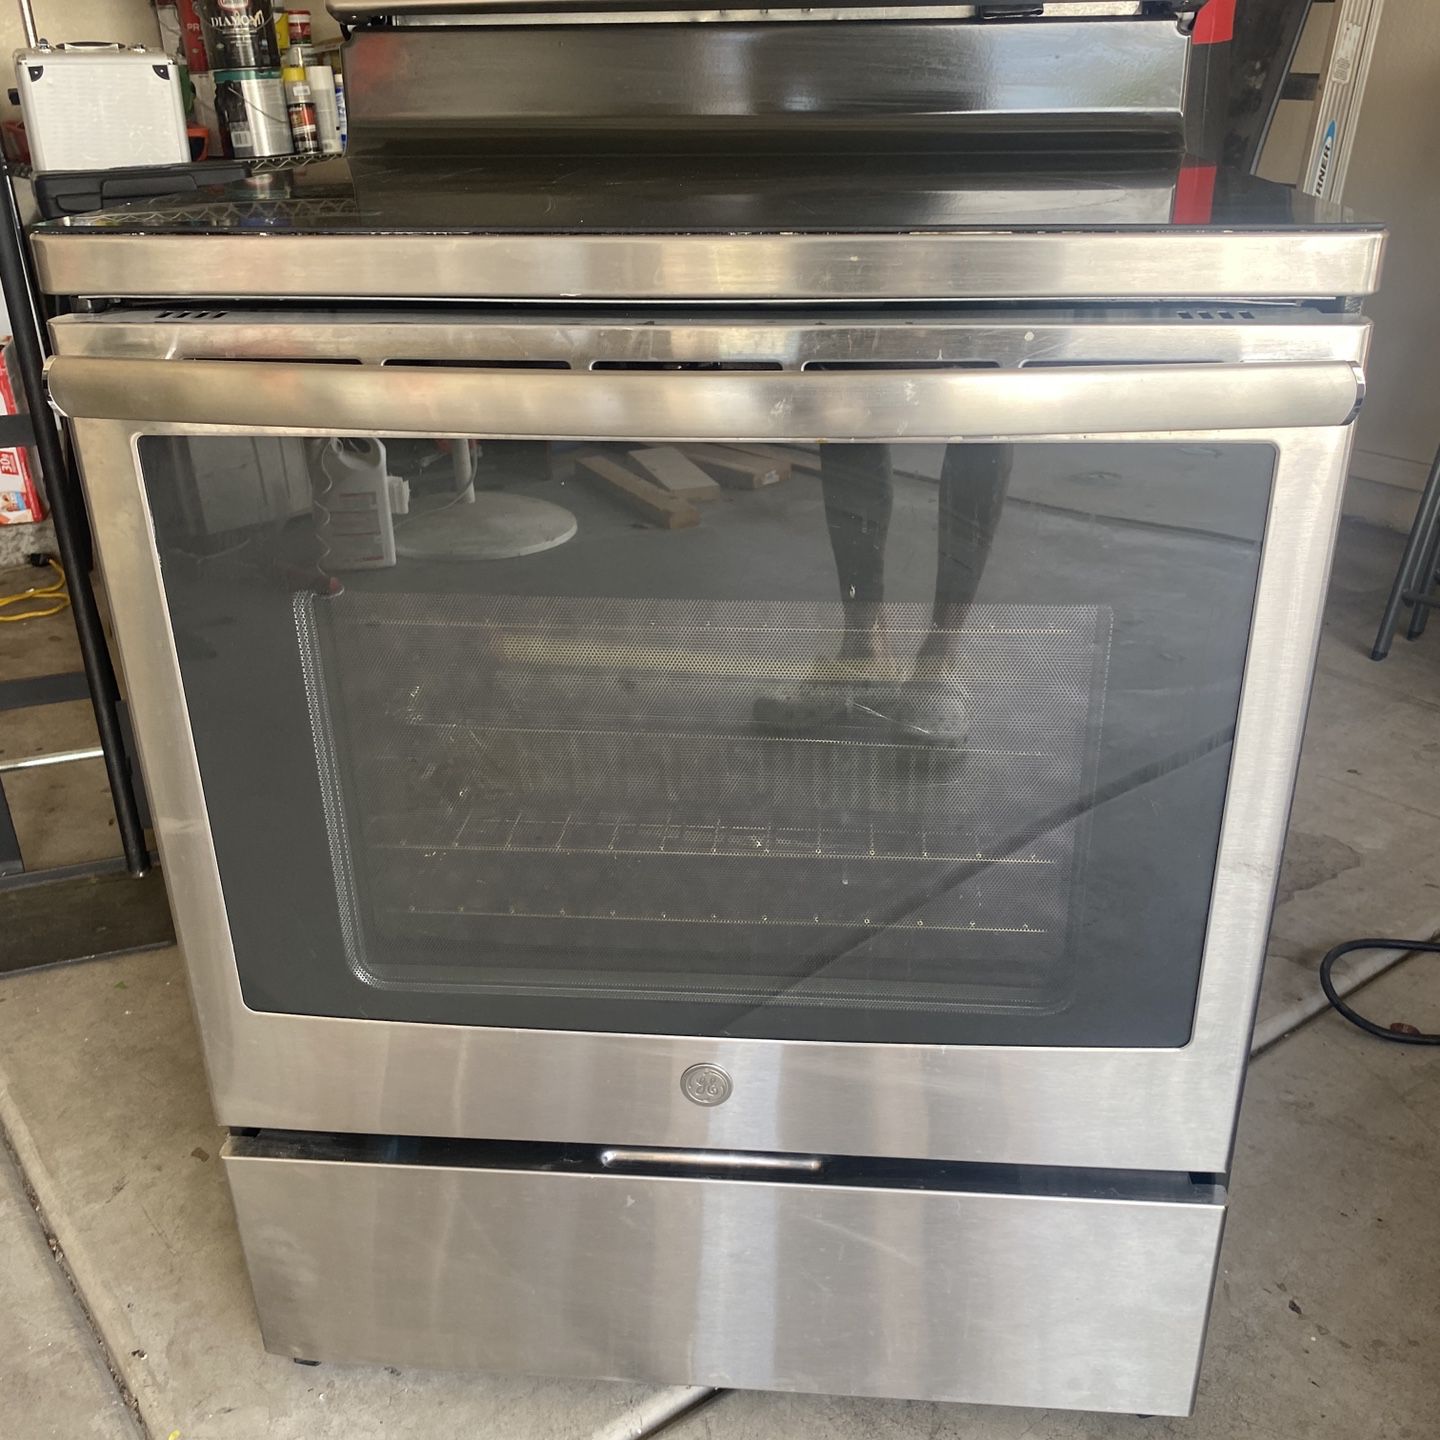 Electric Oven W/over The Oven Microwave Combo